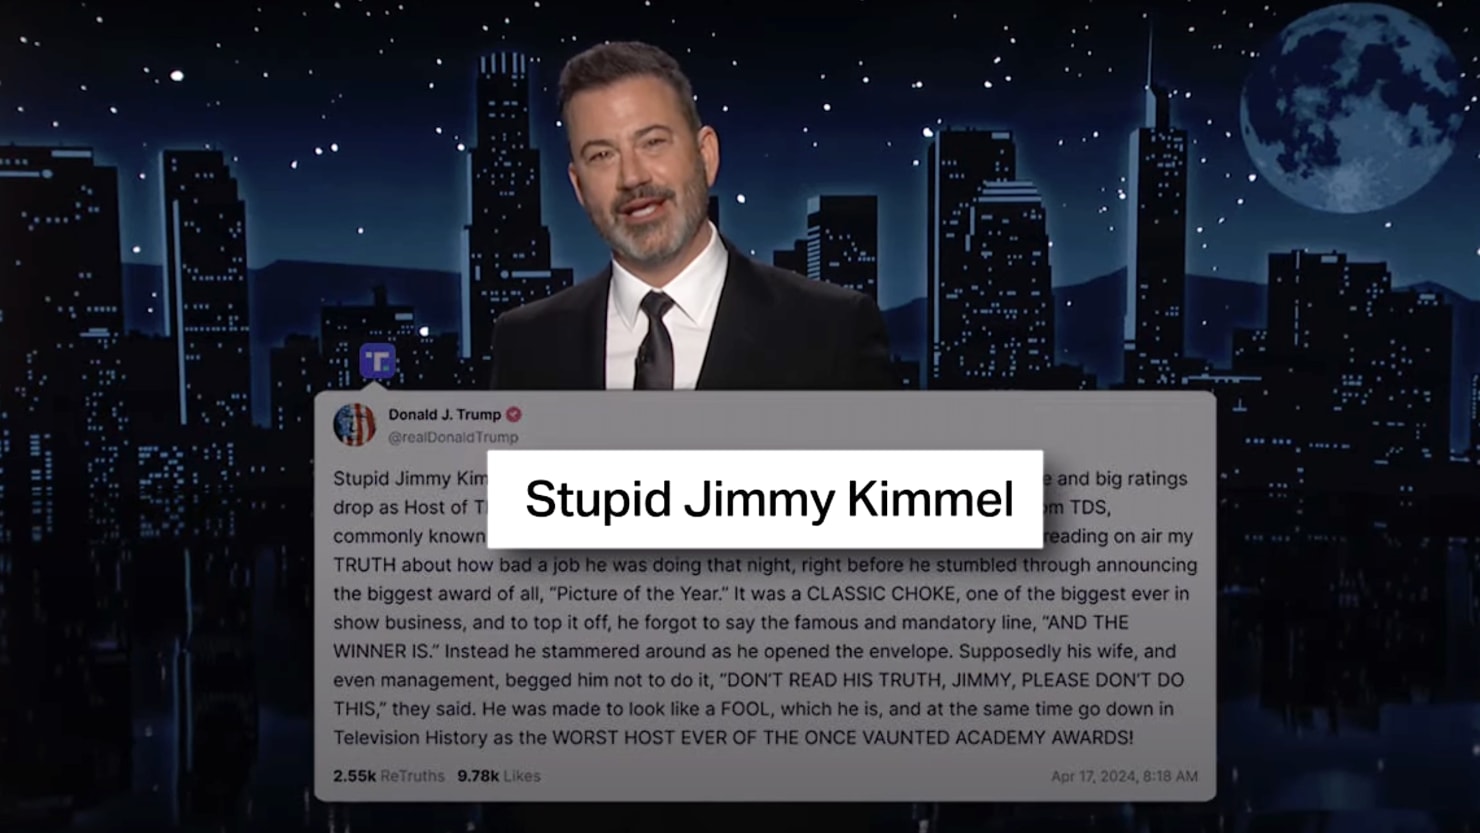 Jimmy Kimmel Fires Back at Donald Trump’s Latest Attack in Late-Night Monologue